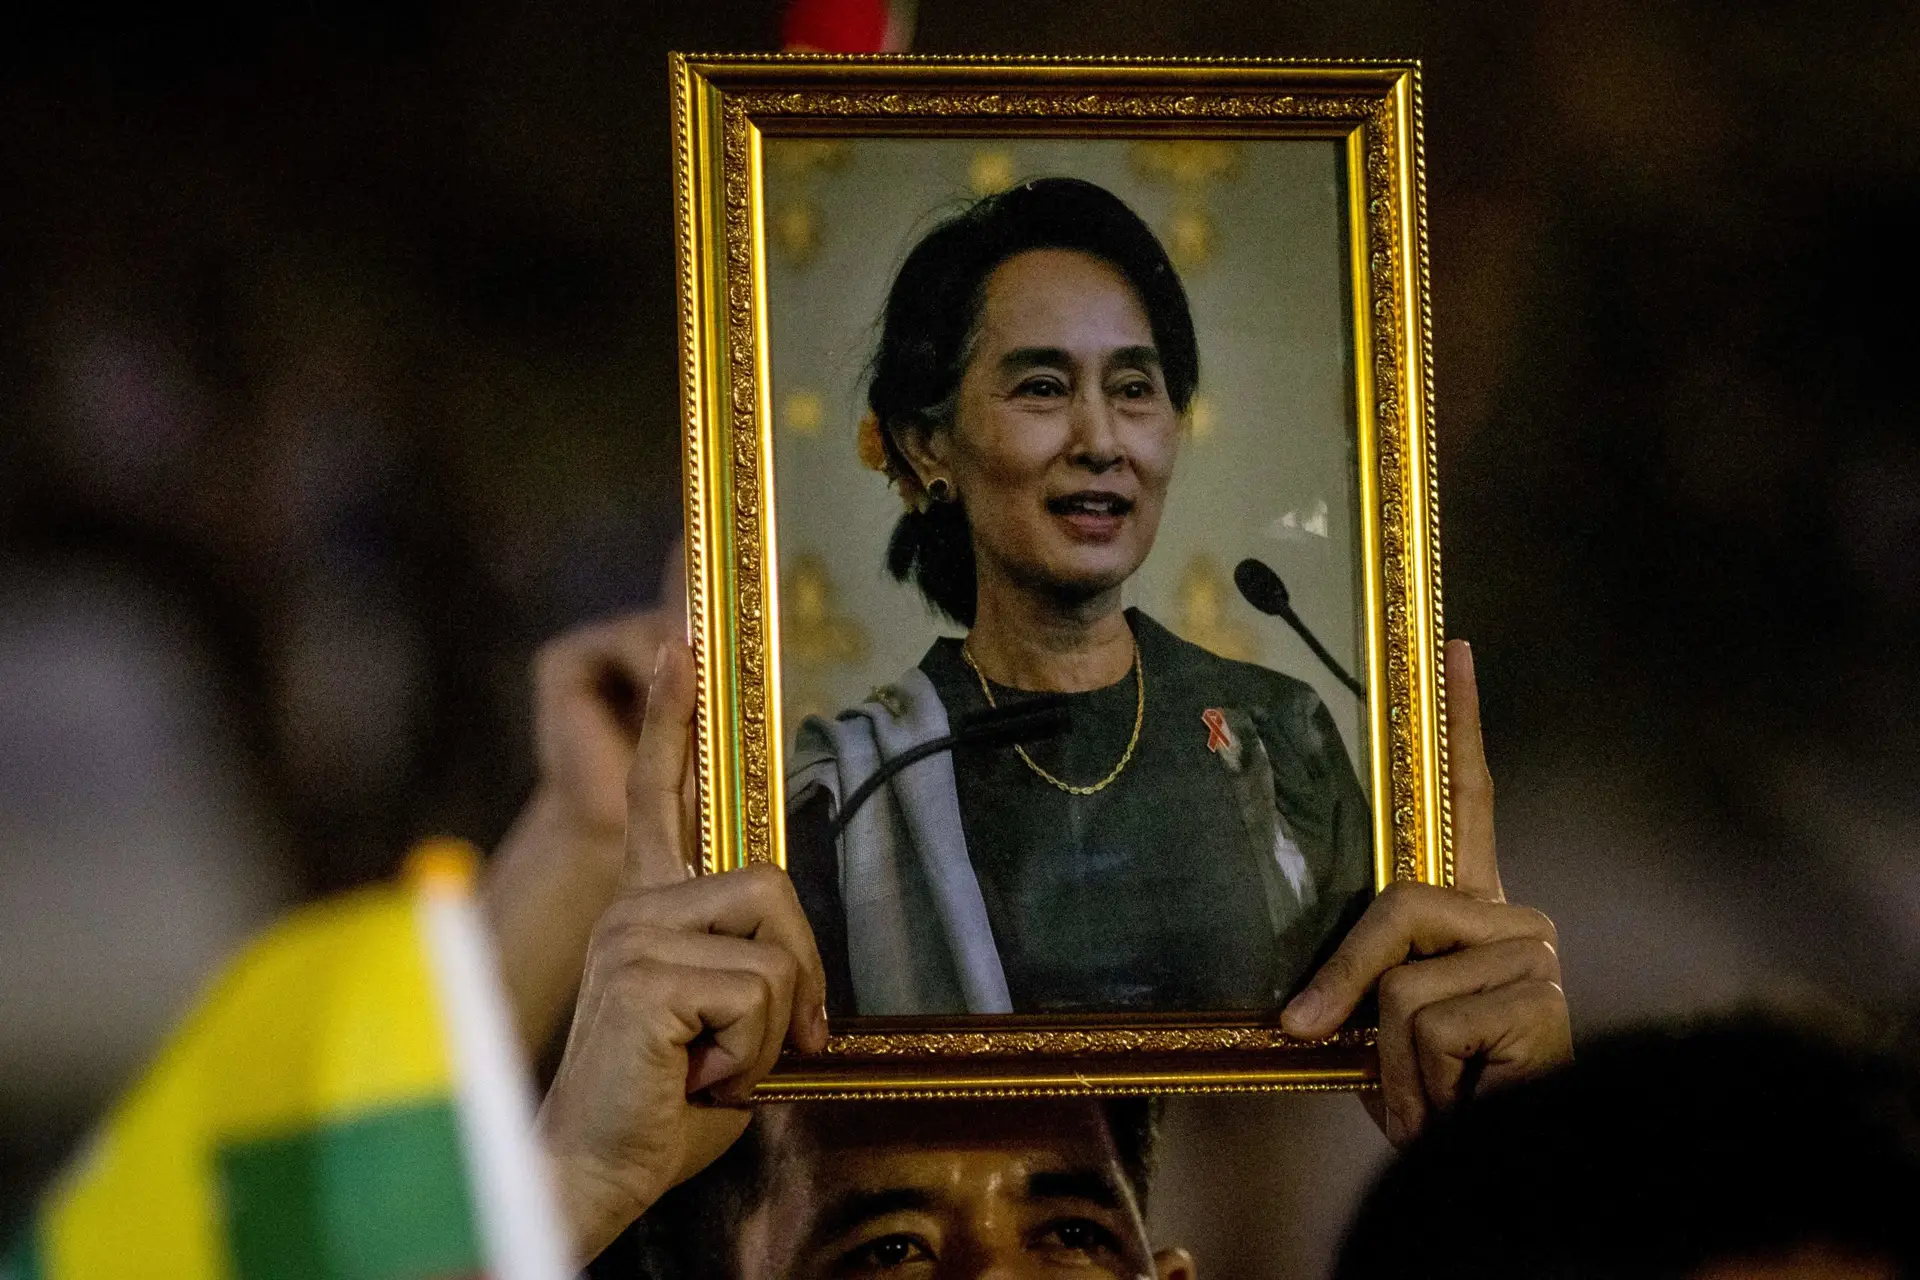 A protester holds up a picture of detained Myanmar civilian leader Aung San Suu Kyi during a rally outside the United Nations ESCAP building in Bangkok on March 5, 2021 calling for the release of political prisoners following the military coup in their homeland. (Photo by Jack TAYLOR / AFP) (Photo by JACK TAYLOR/AFP via Getty Images)